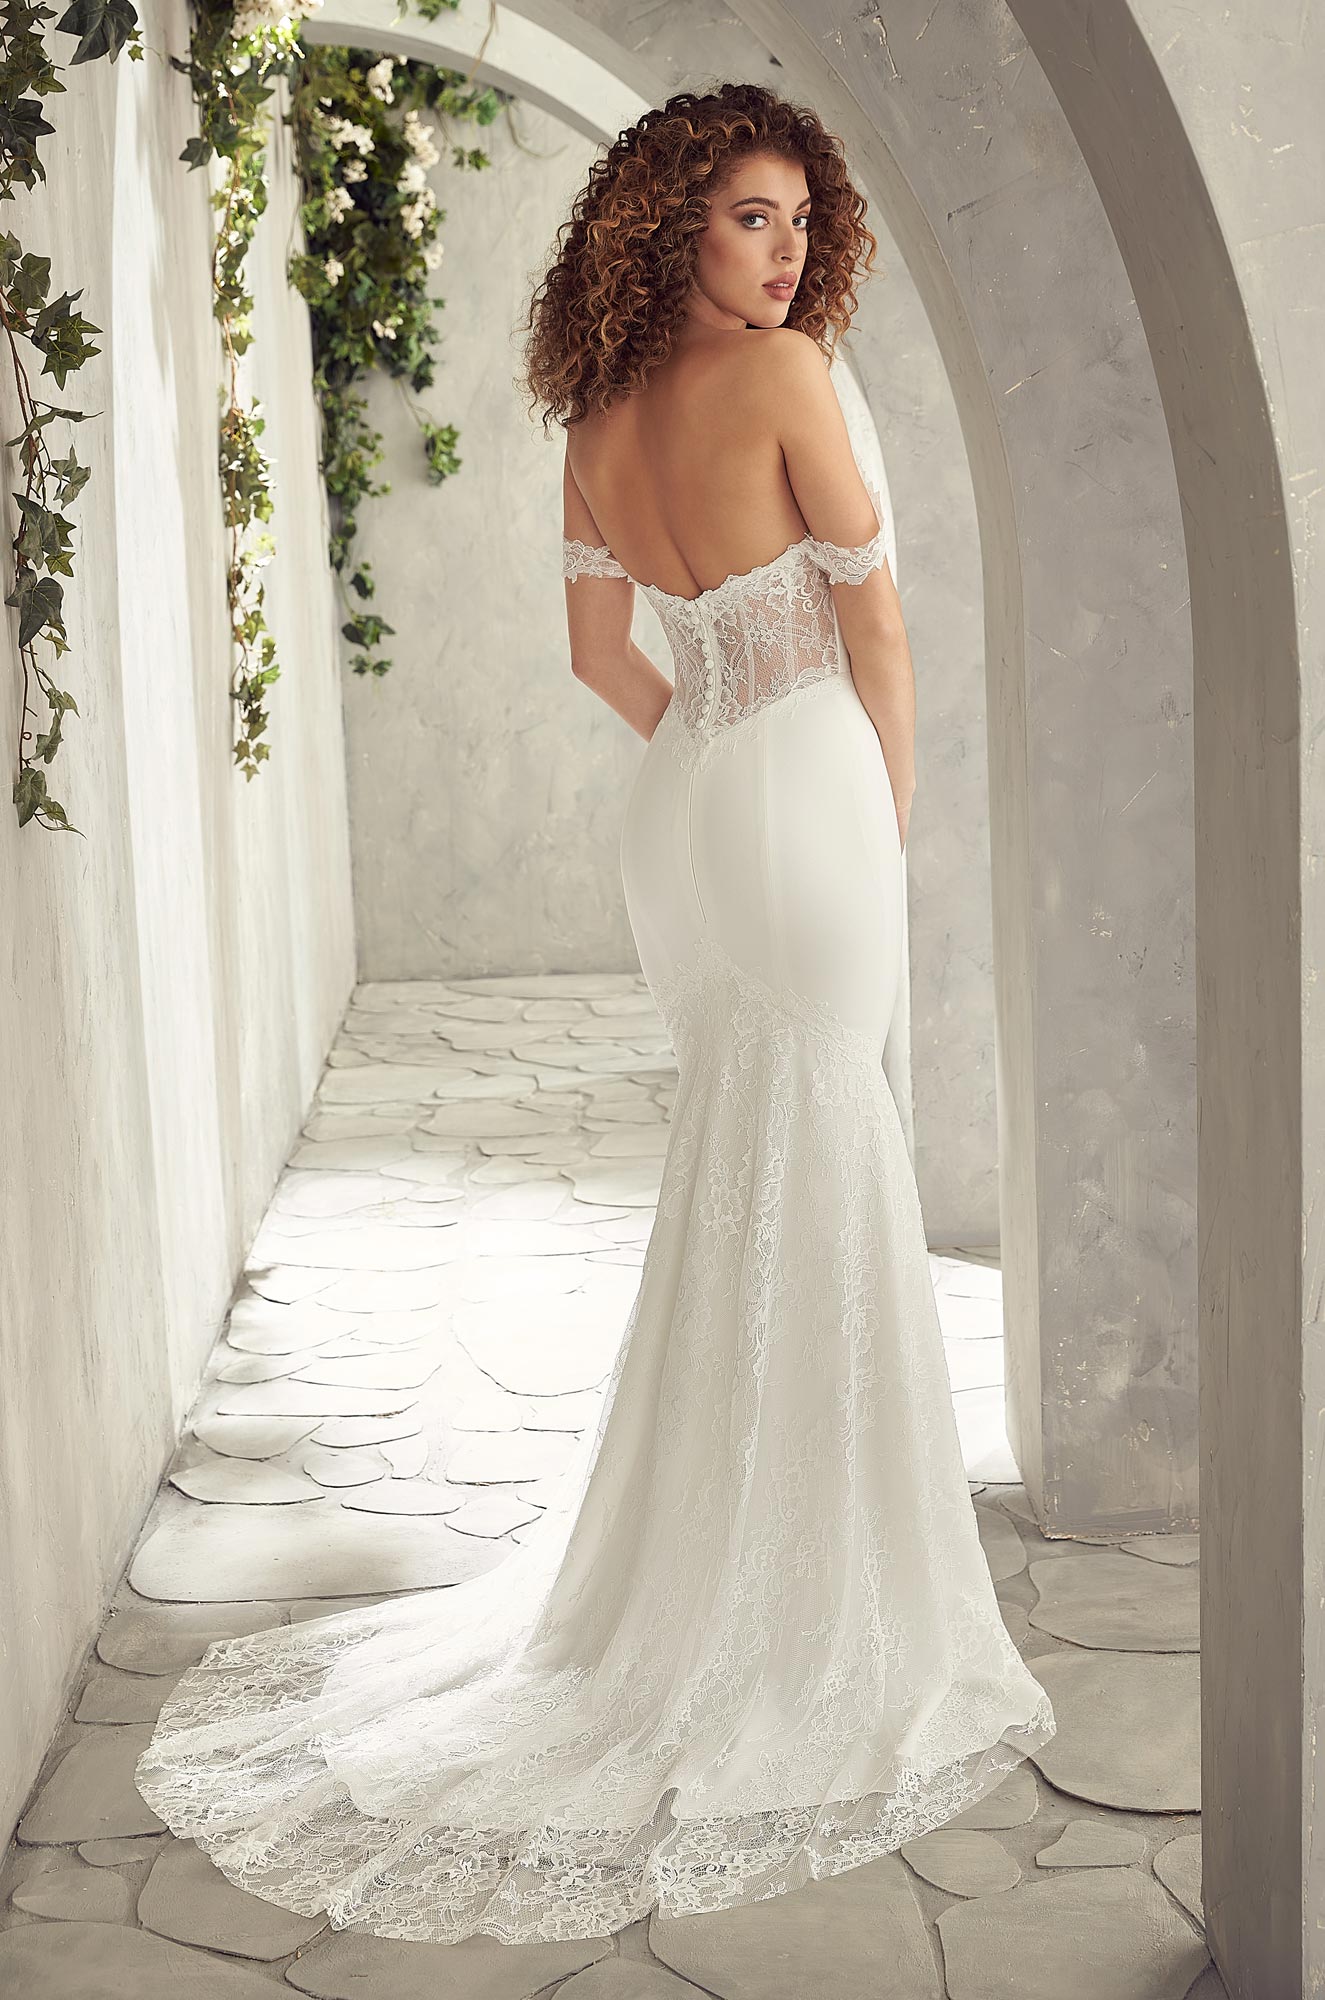 Fit And Flare Wedding Dress With Sweetheart Neckline And Back Lace Details Kleinfeld Bridal 